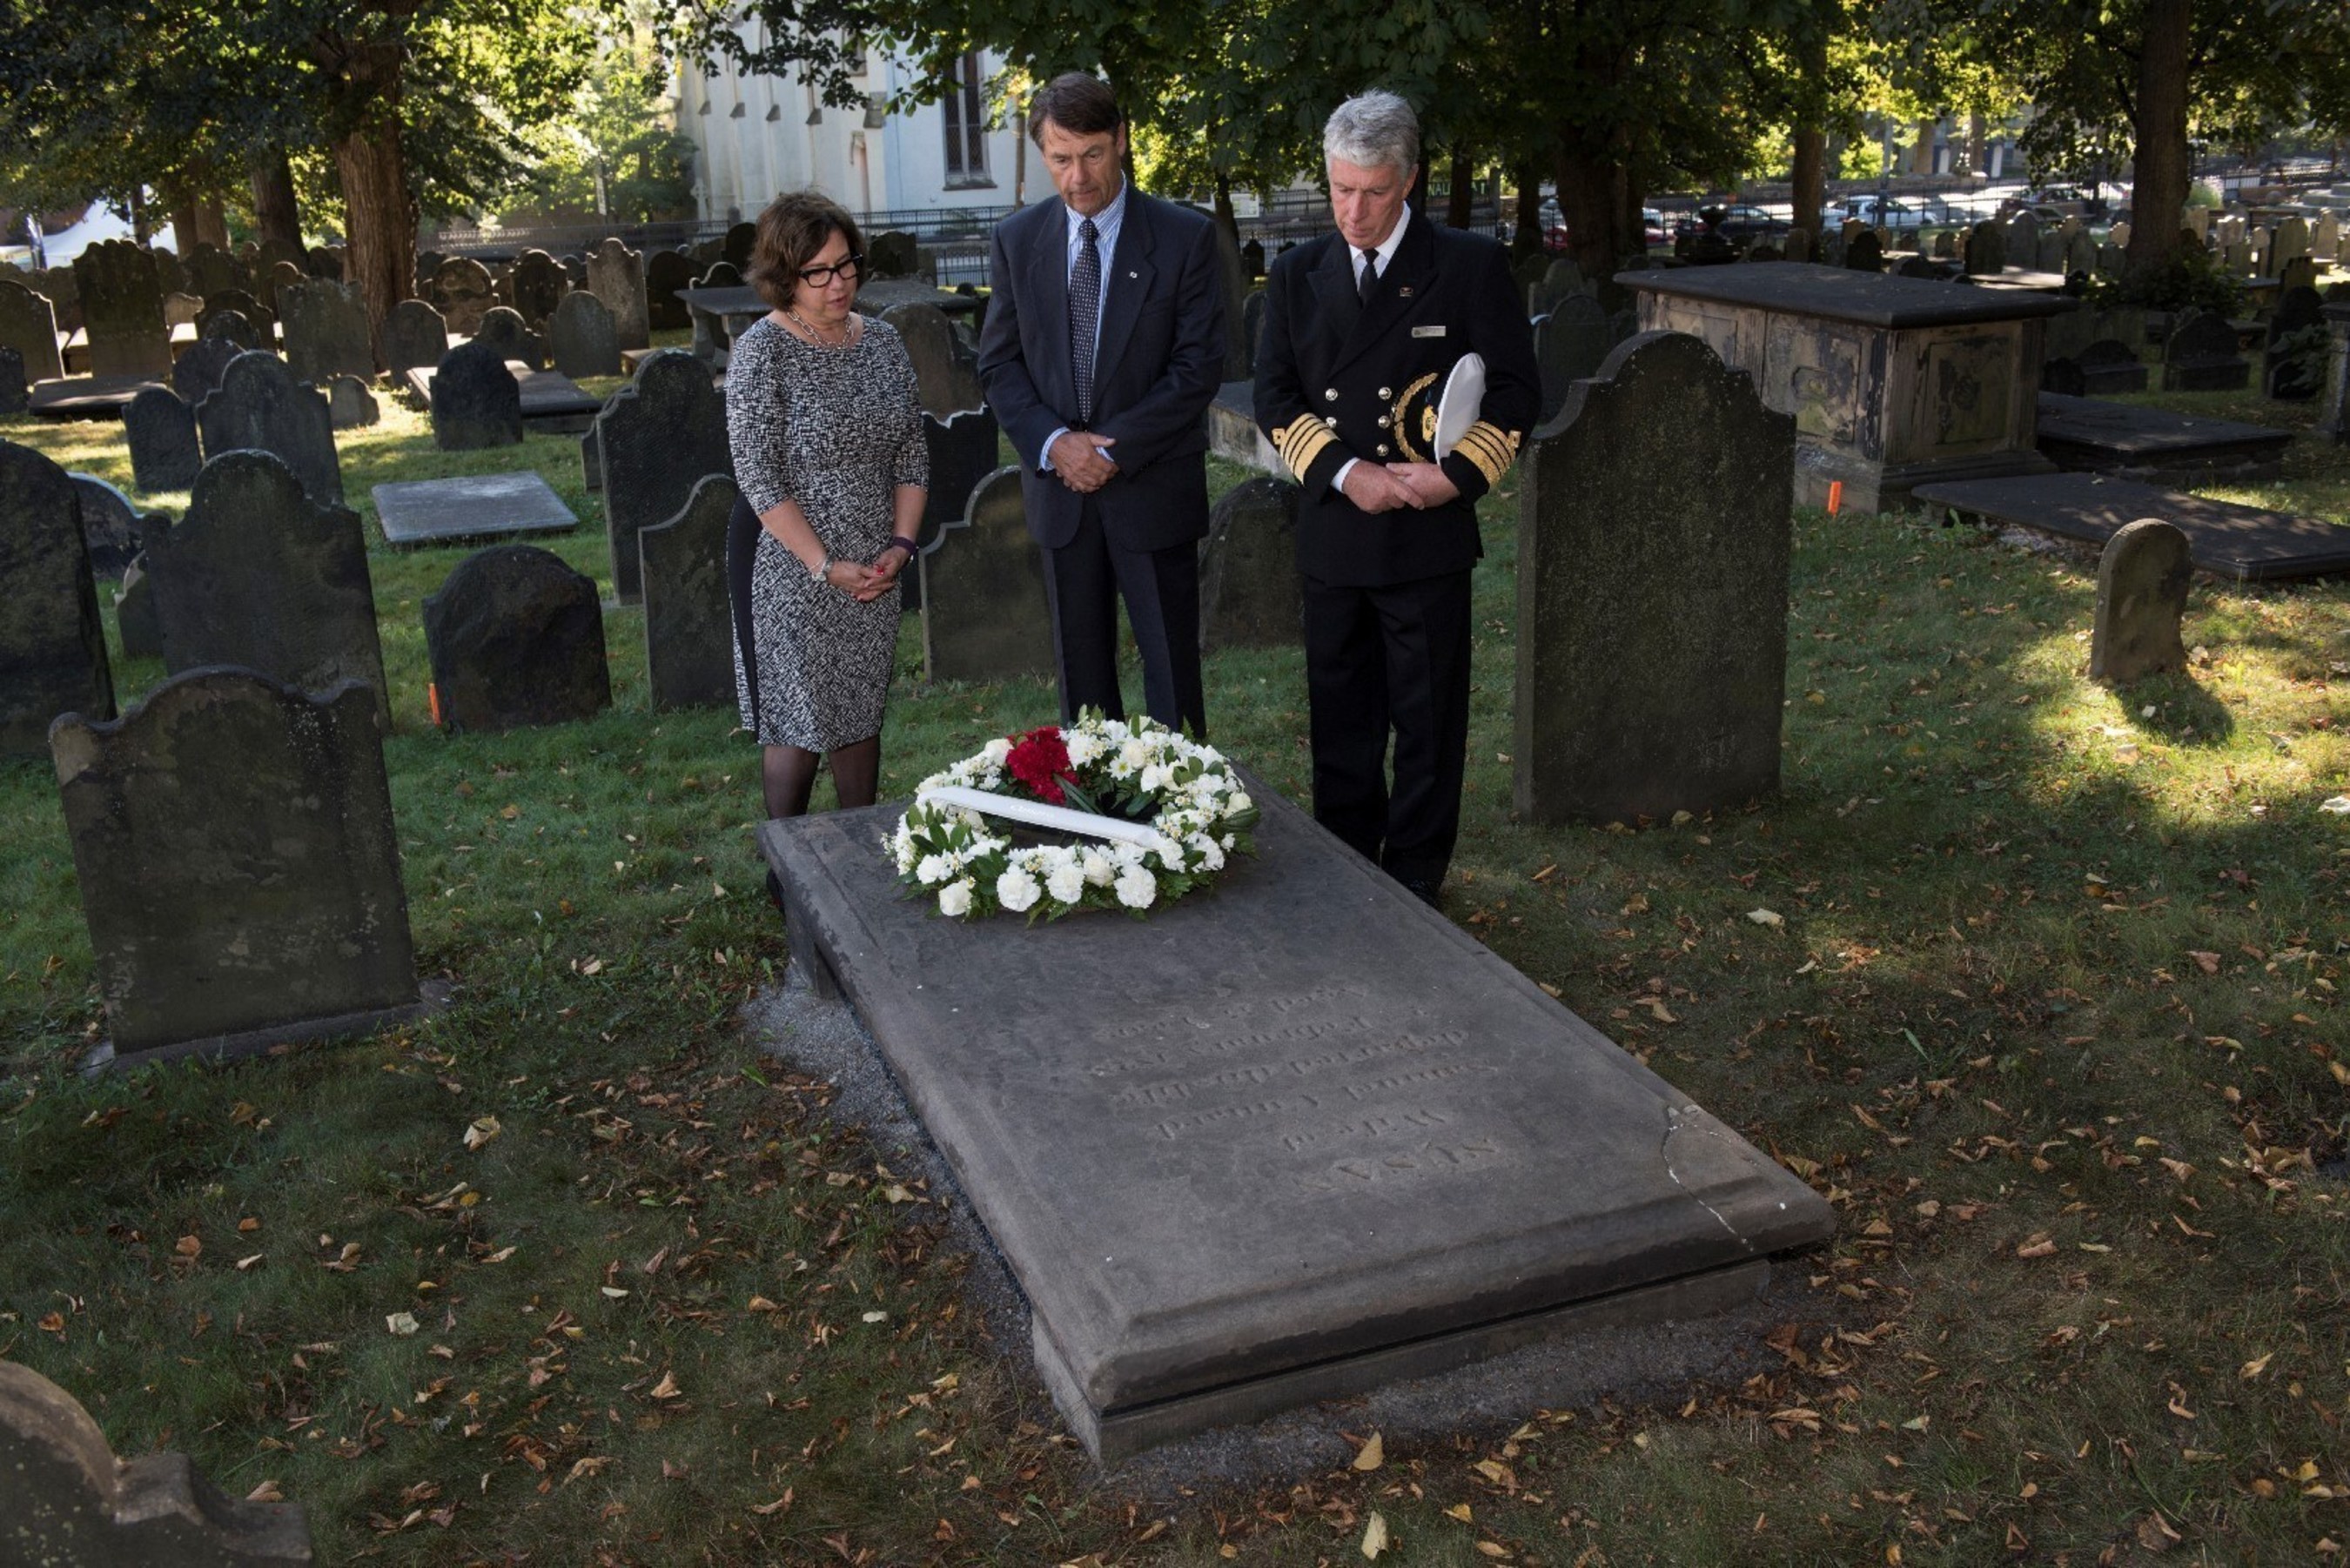 As part of today's commemorative activities, Cunard paid tribute to the legacy of Samuel Cunard and wife, Susan, by laying a wreath on Suan's gravesite. Pictured: Captain Kevin Oprey, Master of Queen Mary 2, Cunard historian John Langley, and Cunard Public Relations Director Jackie Chase.